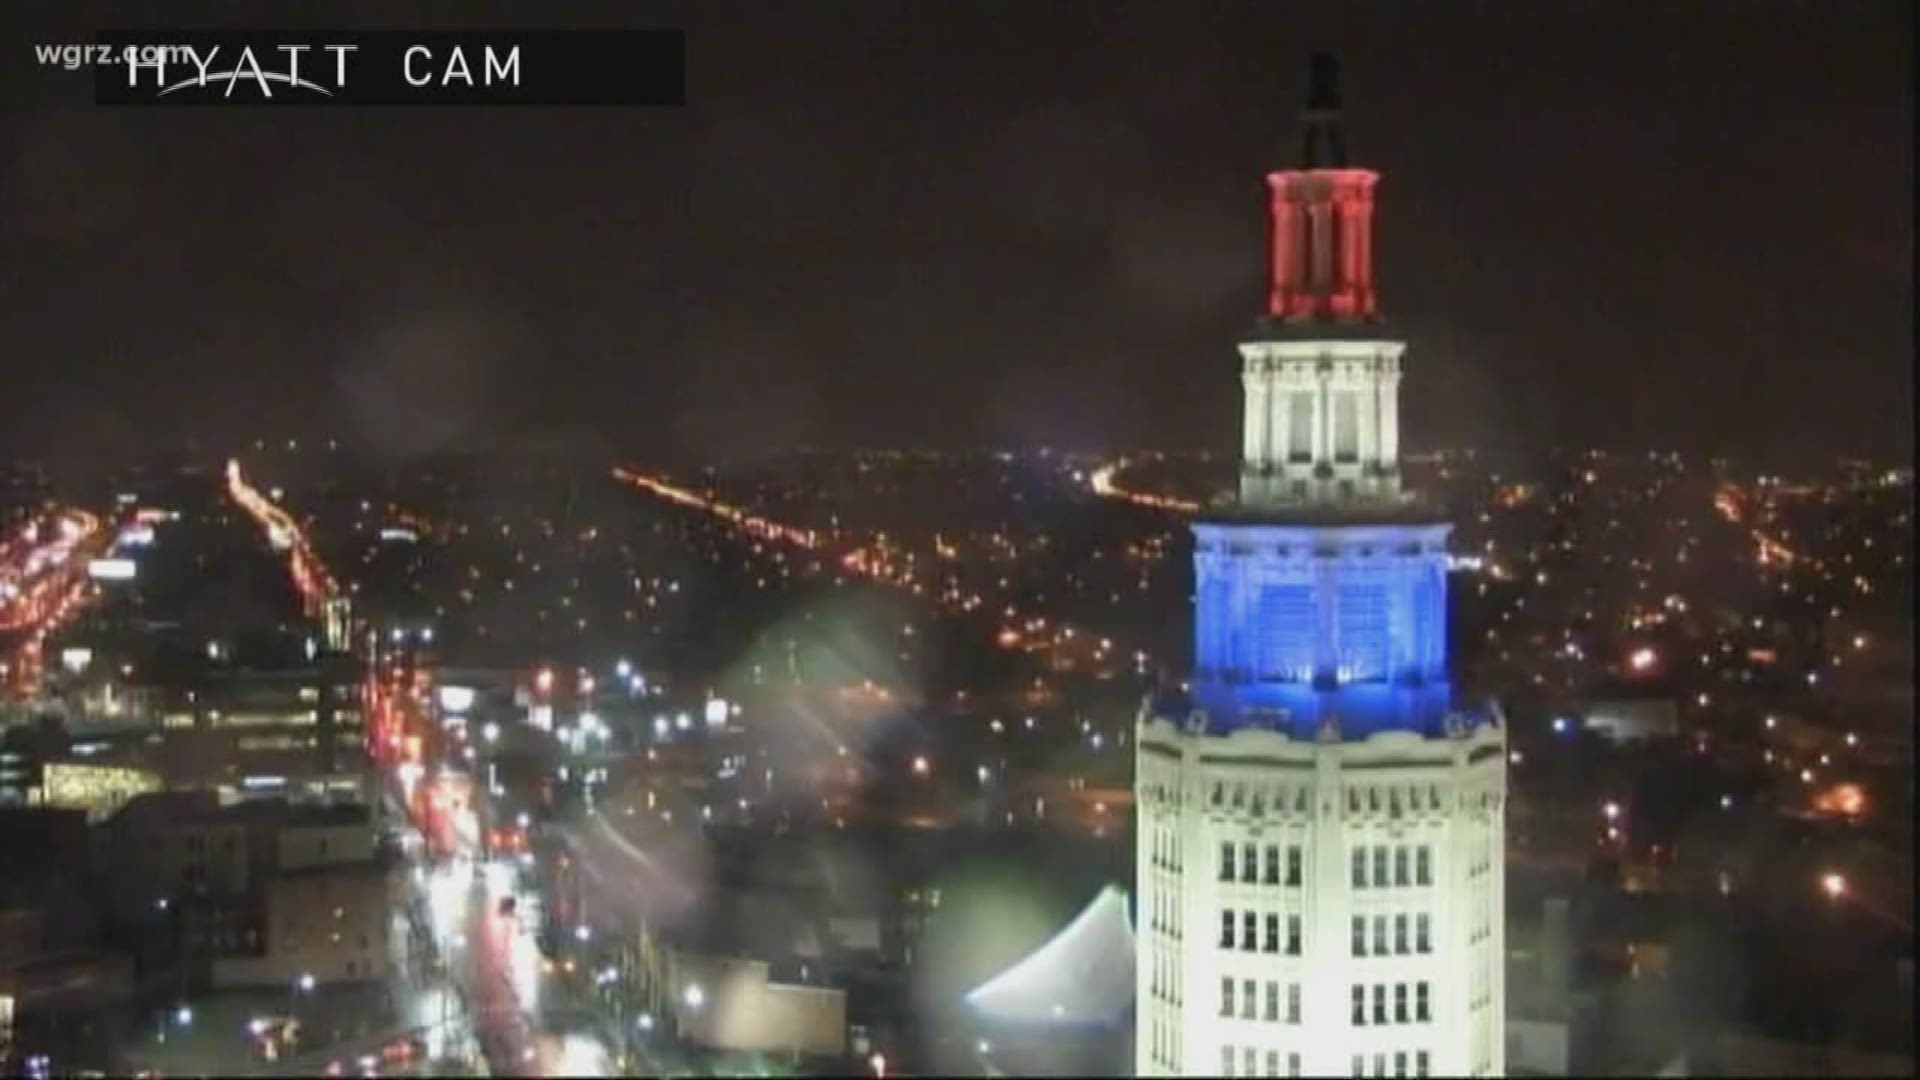 The structures were lit up in blue, white, red on Tuesday night.